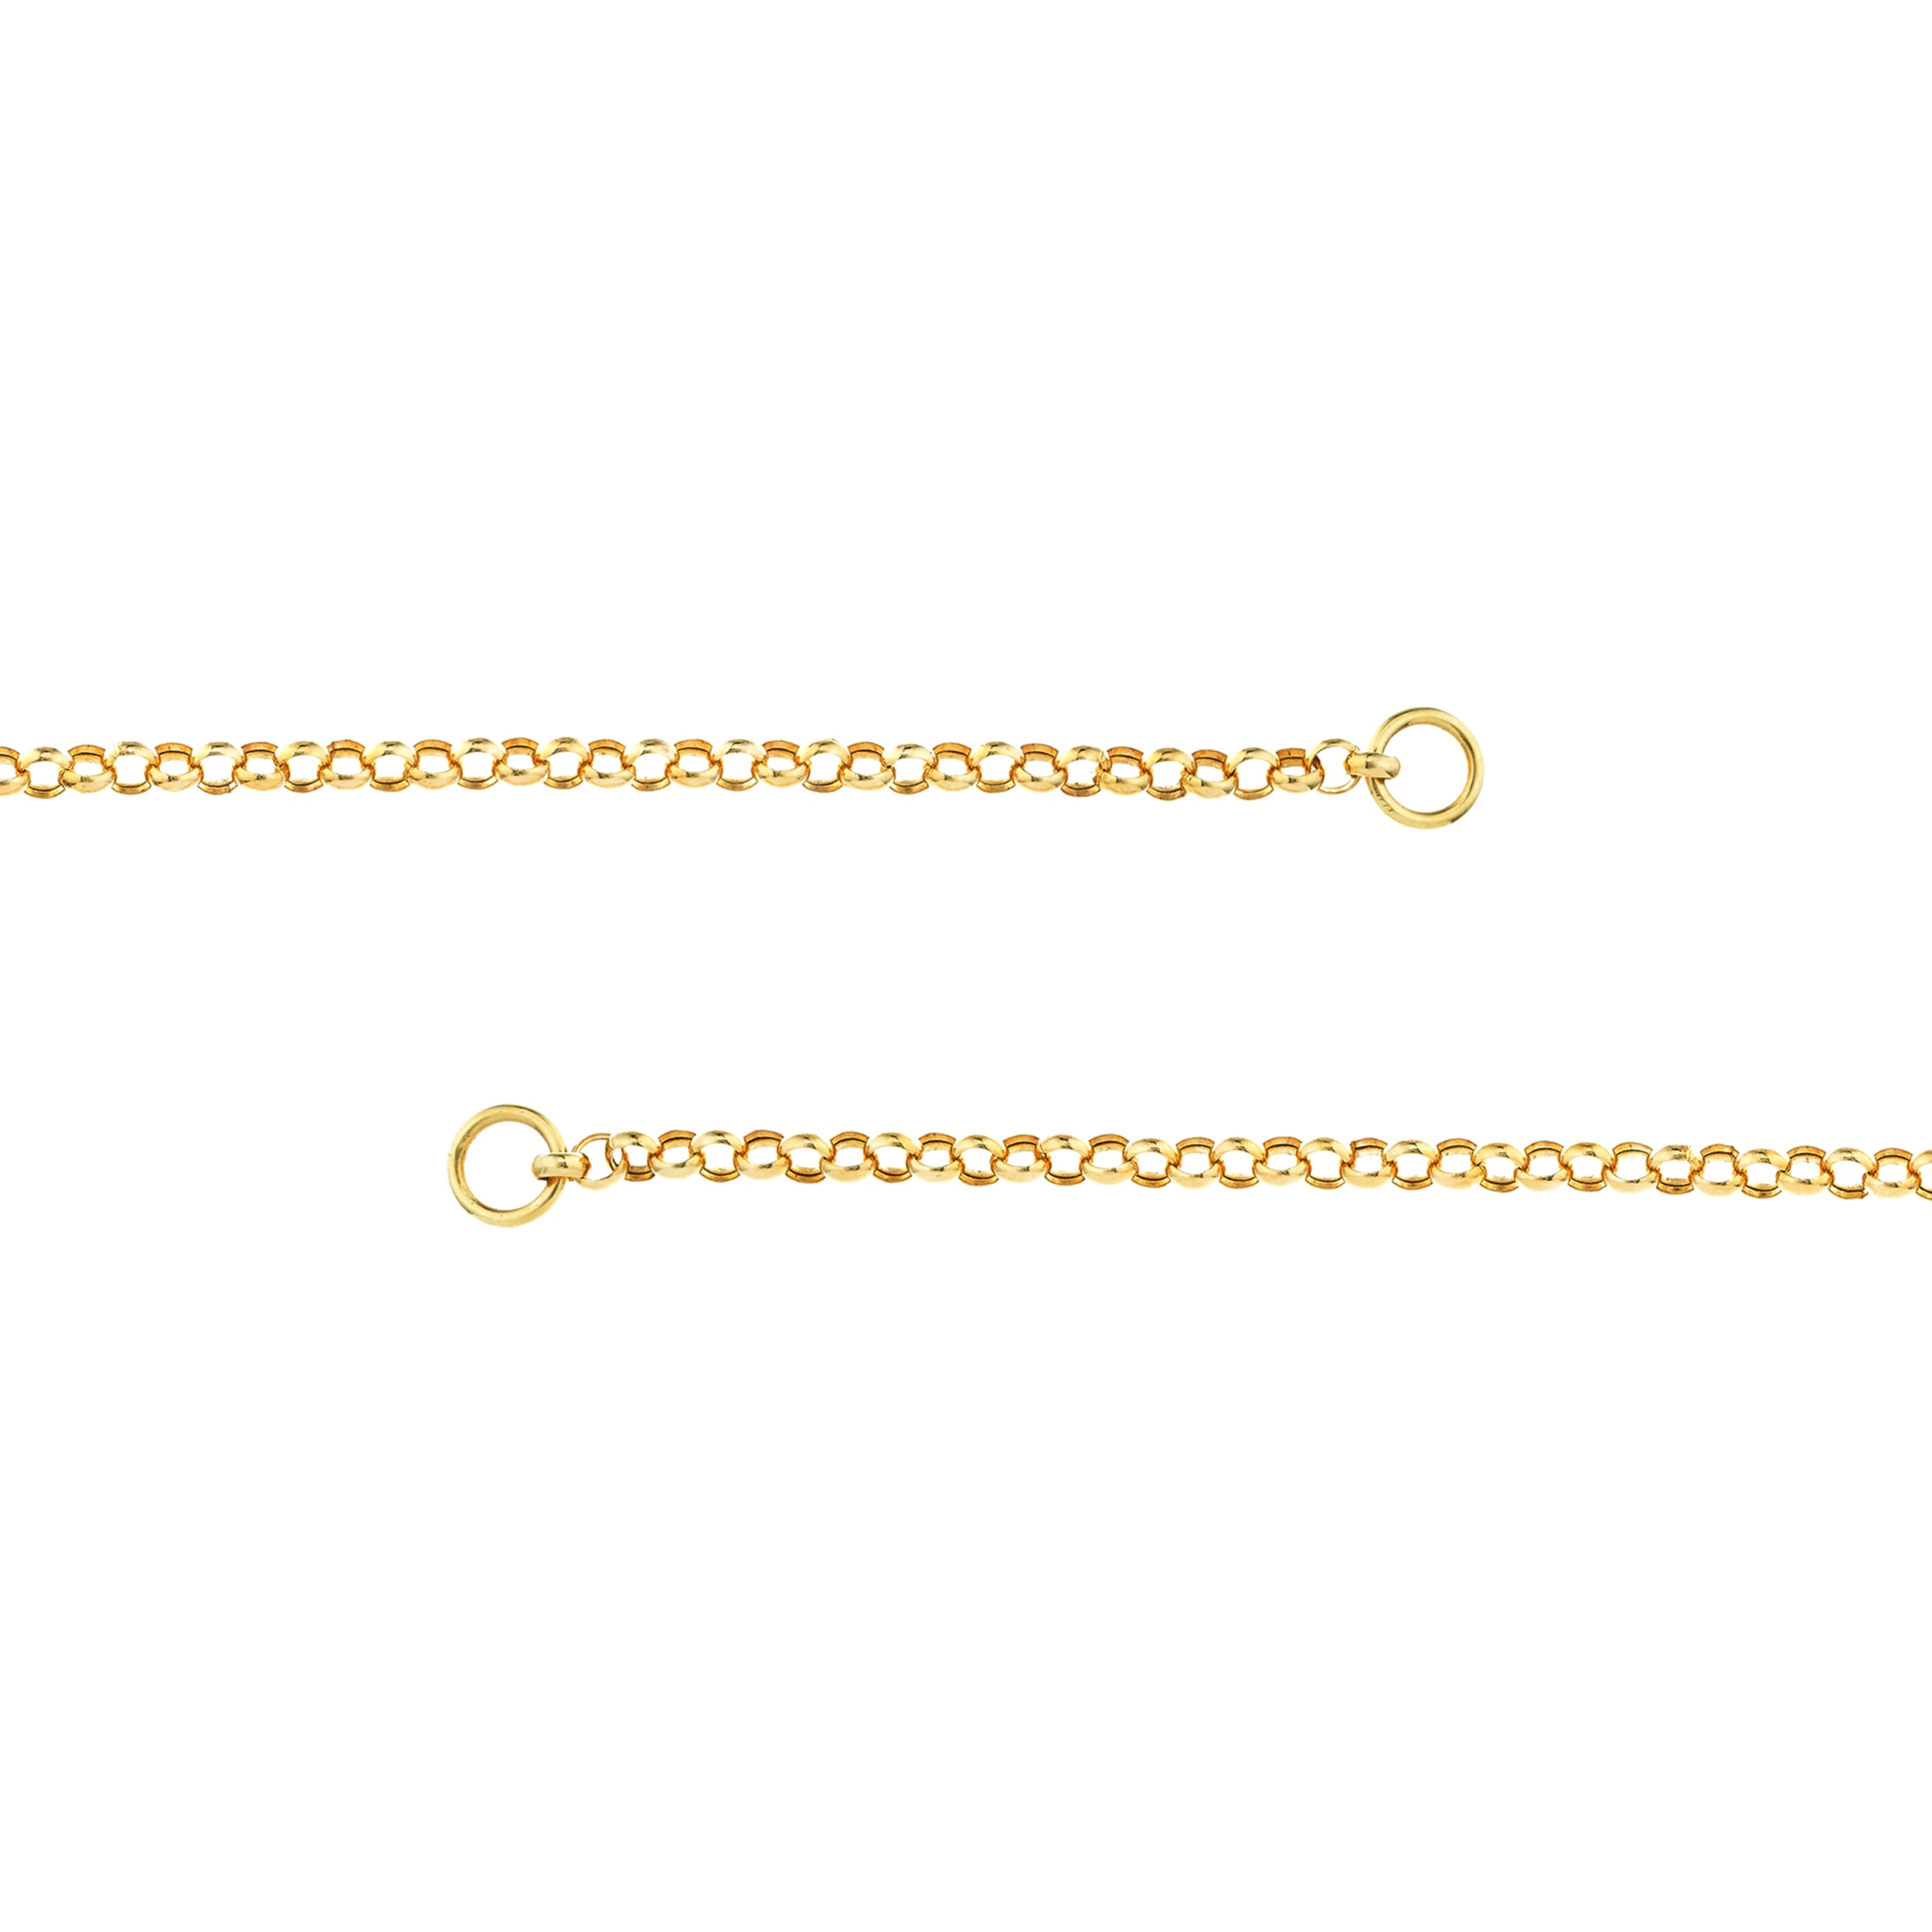 14K Yellow Gold 3.8mm Rolo Split Chain with End Rings for Lariat Y Necklace Bracelet Anklet Push Clasp Lock Connector Bail Pendant Charm Hanger